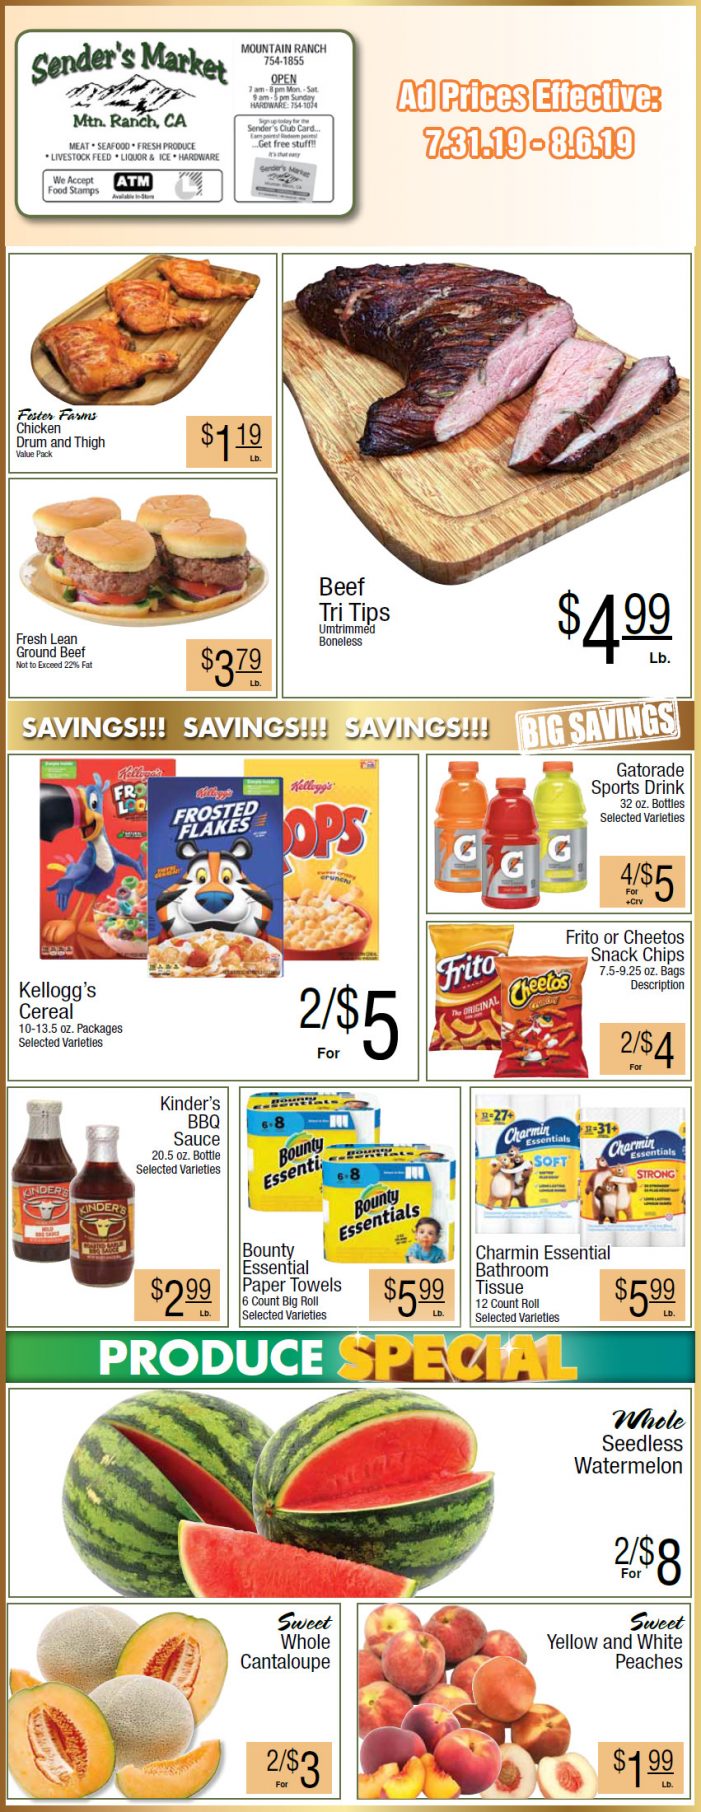 Sender’s Weekly Ad & Grocery Specials Through August 6th